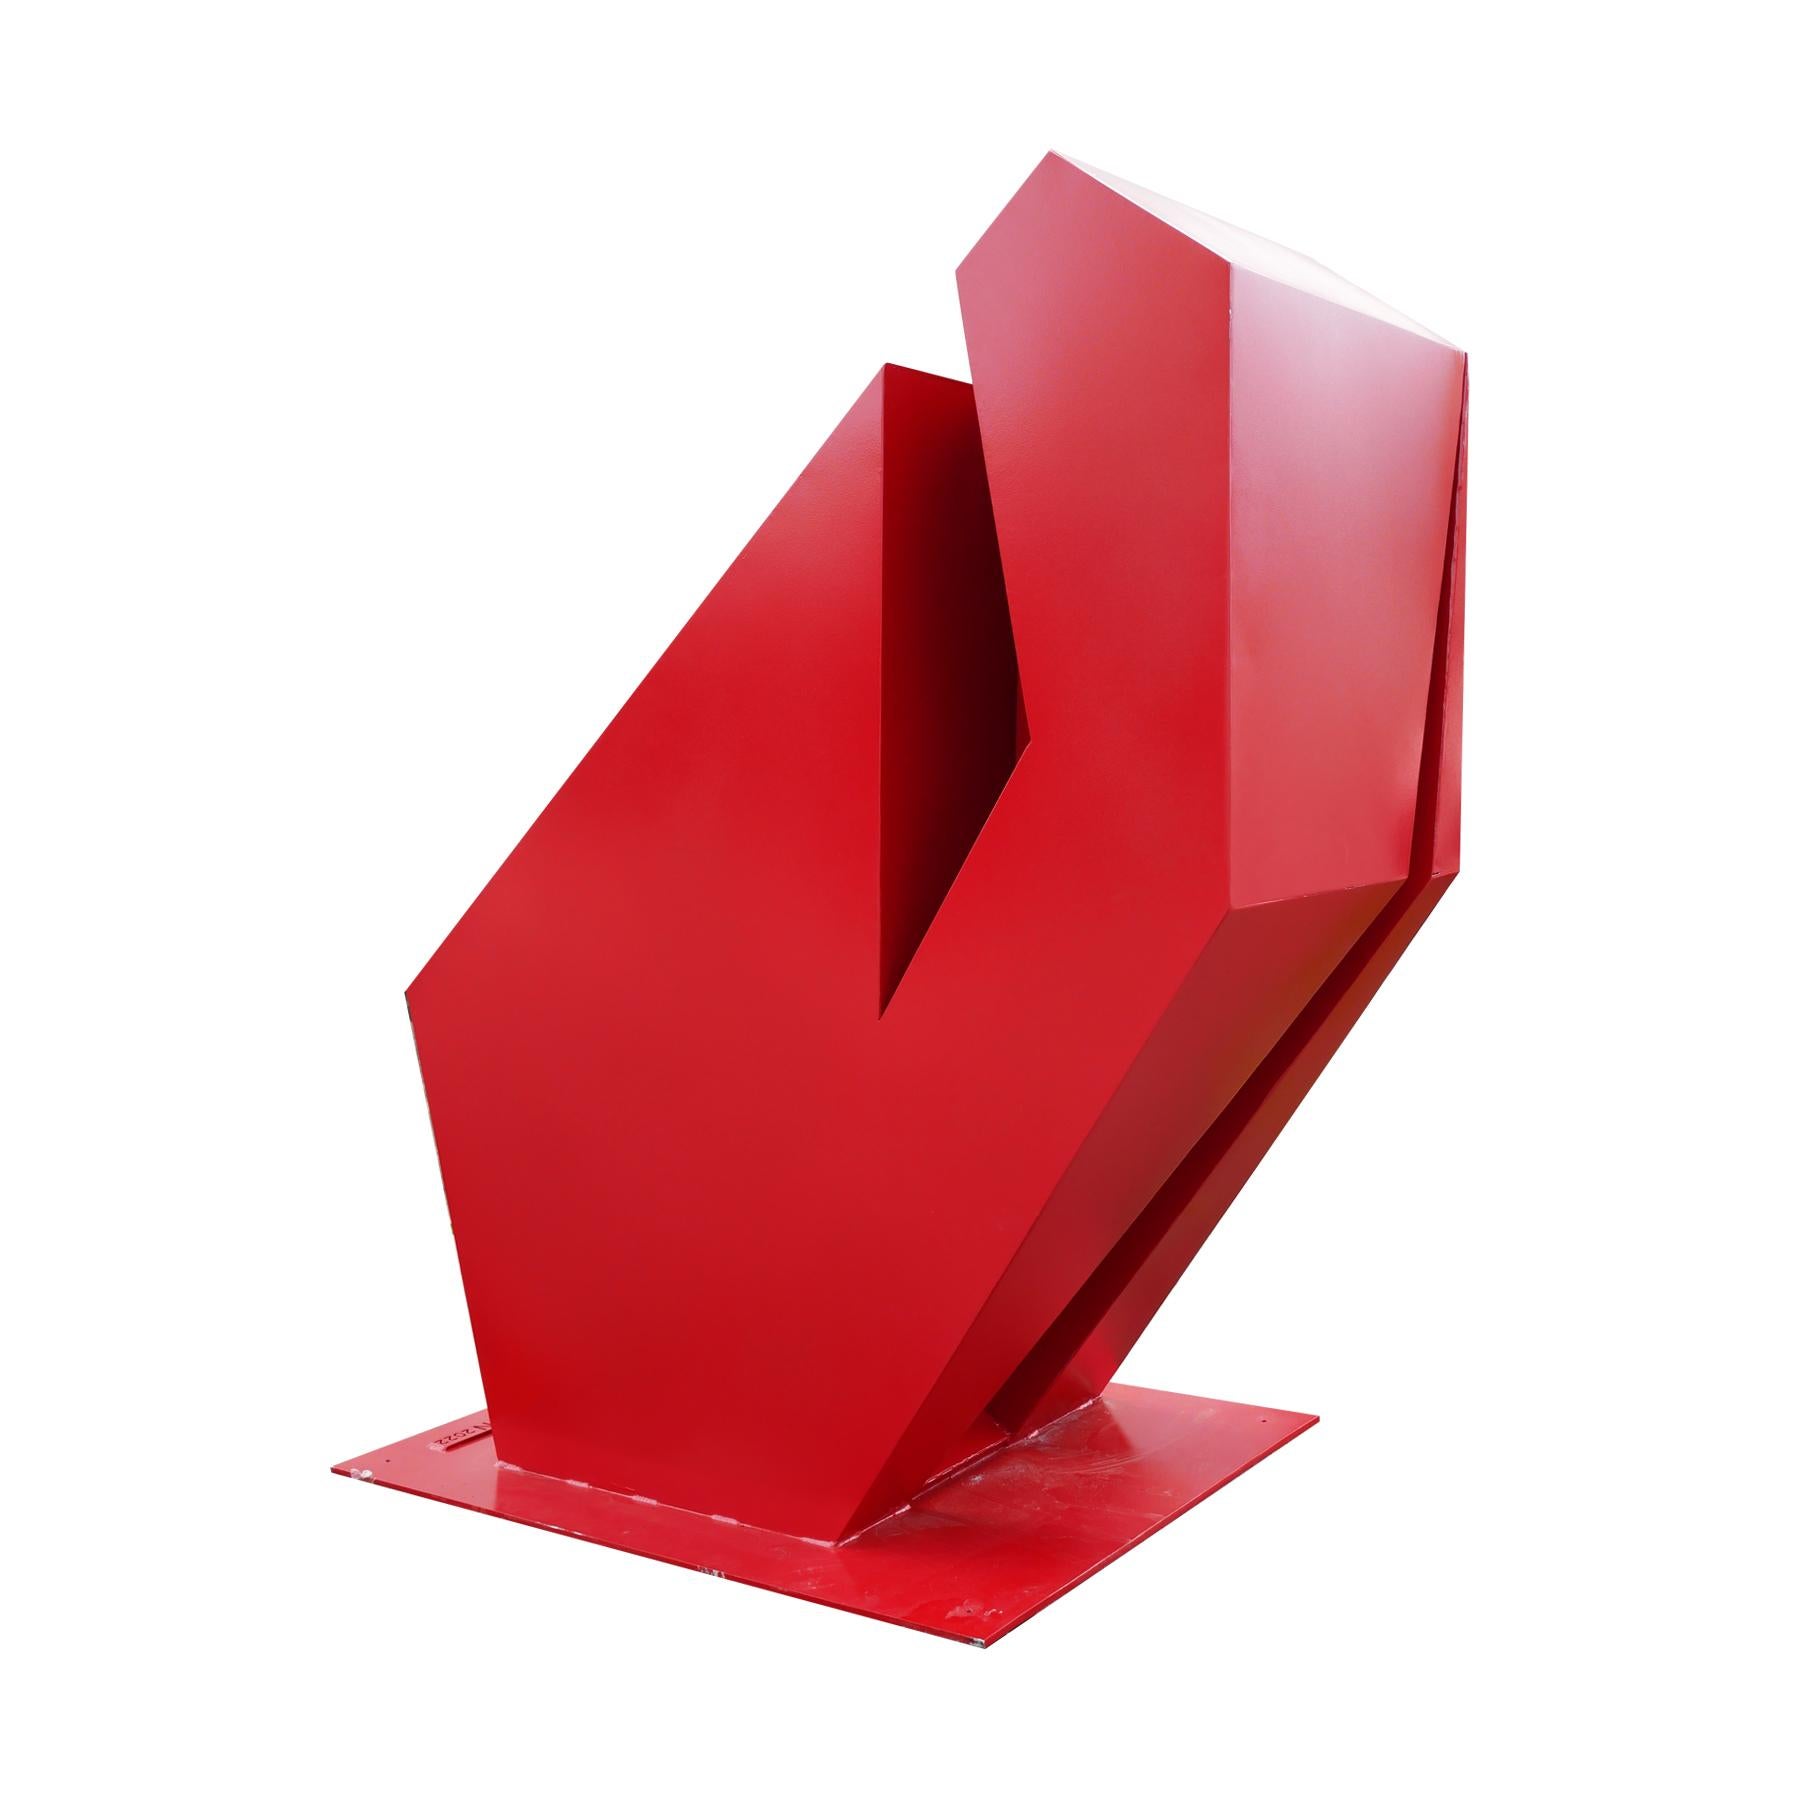 Large Contemporary Geometric Red Outdoor Sculpture  For Sale 2